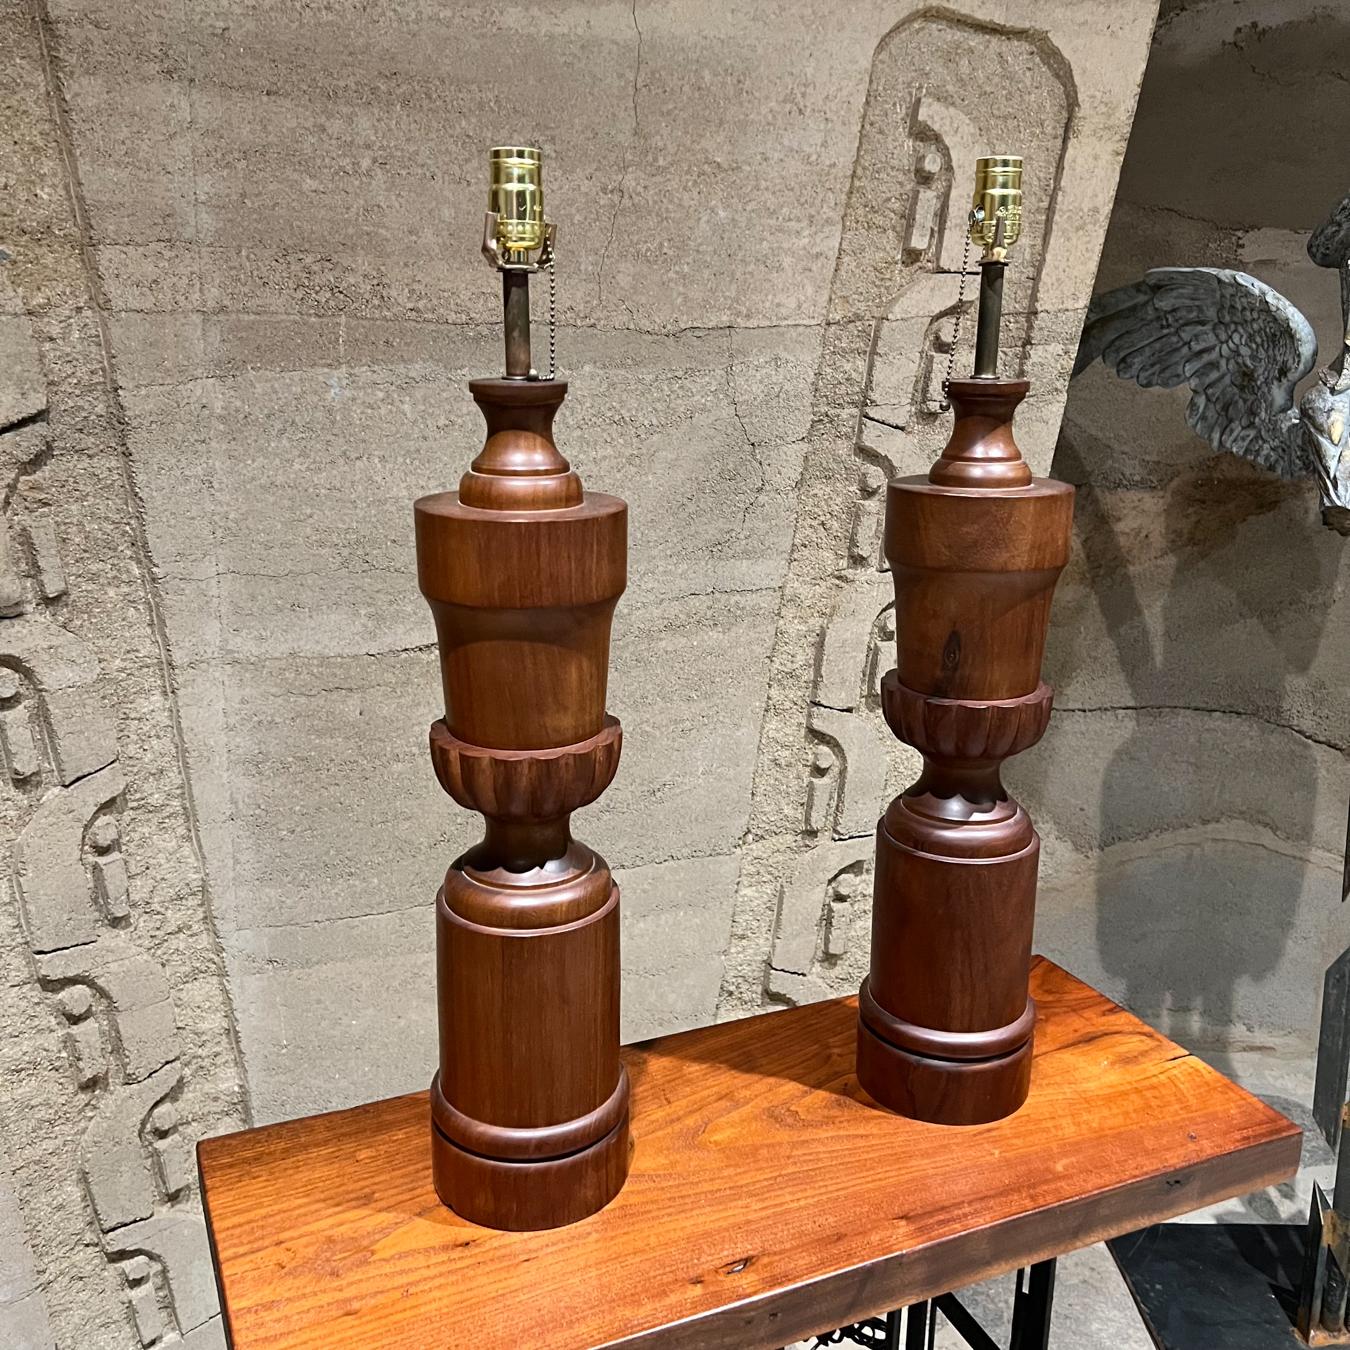 1950s Modern African solid mahogany wood sculptural table lamps
Pair of African Mahogany Wood Table Lamps very nice Sculptural Shape.
28 to the socket x 6 diameter
Preowned unrestored original vintage condition.
Original electrical cord.
Refer to